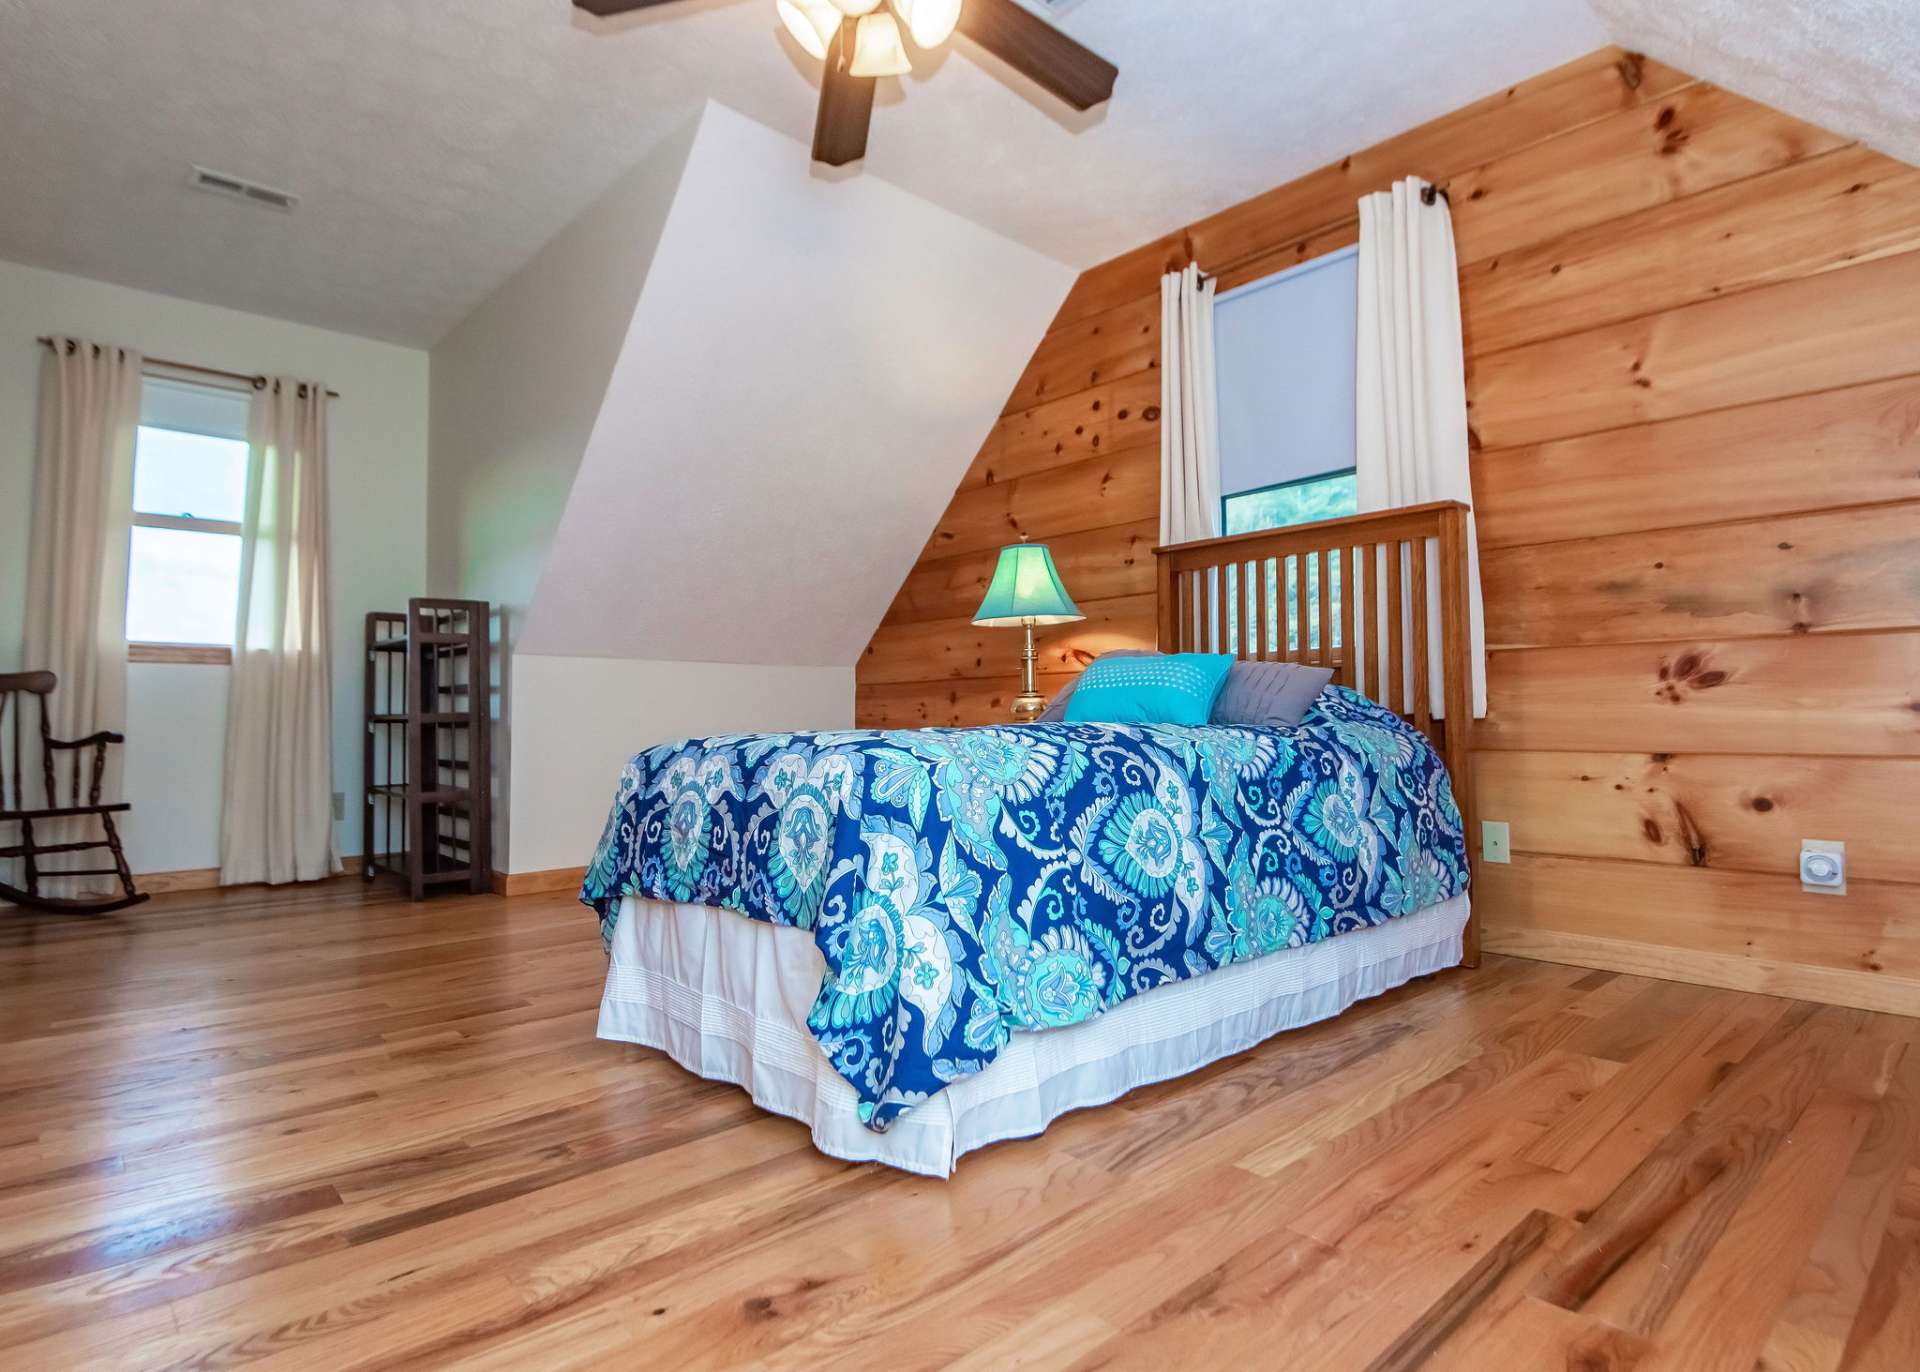 The upper level features two guest bedrooms and a full bath.